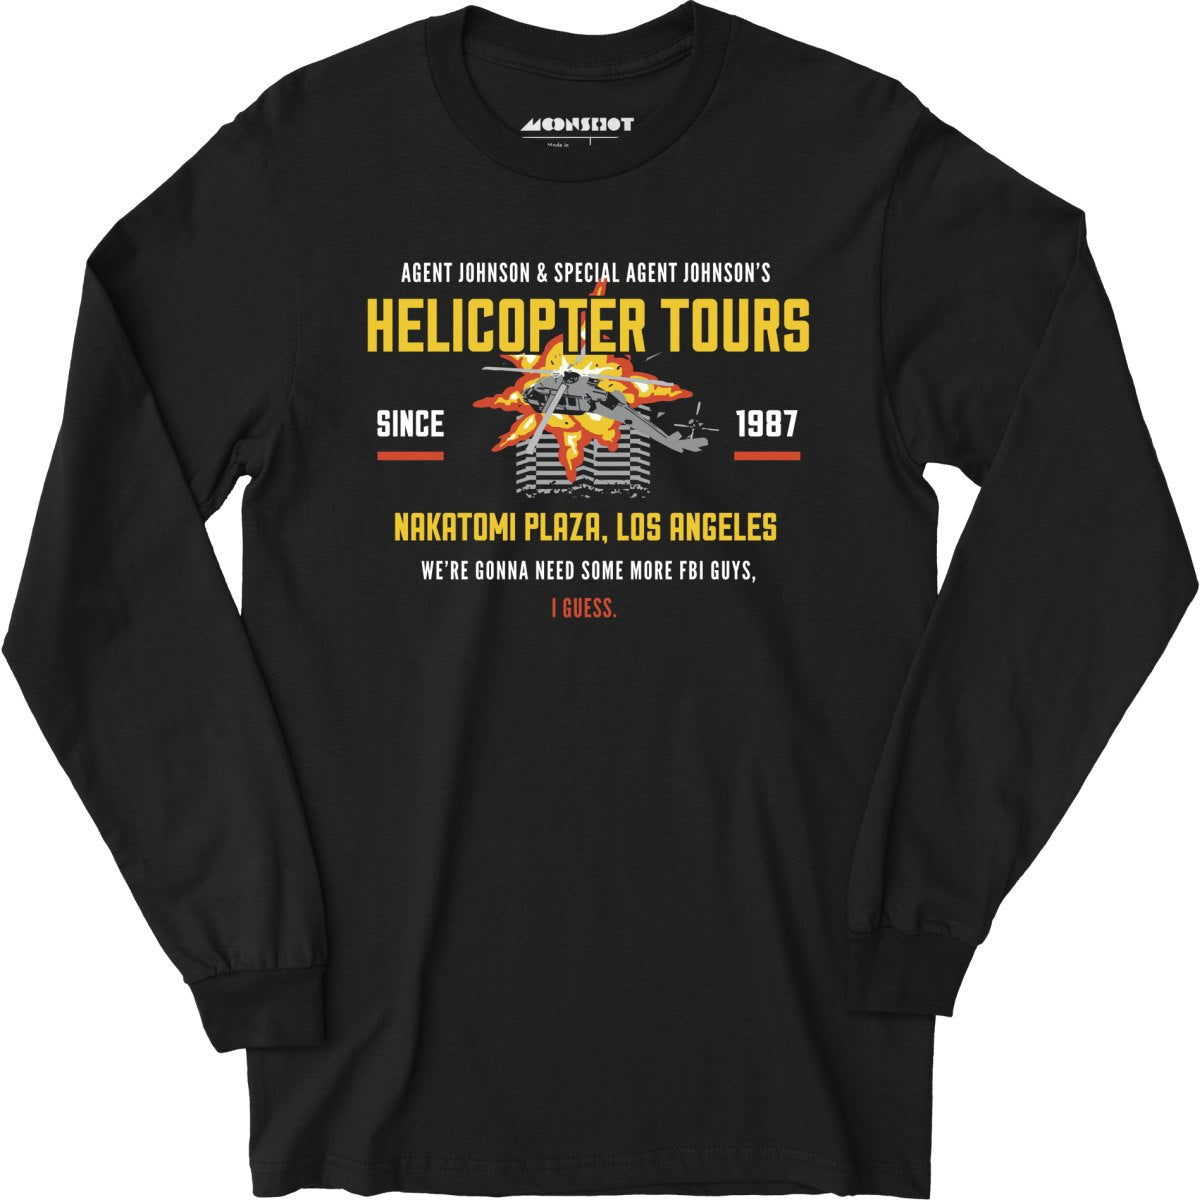 Agent Johnson & Johnson's Helicopter Tours - Die Hard - Long Sleeve T-Shirt